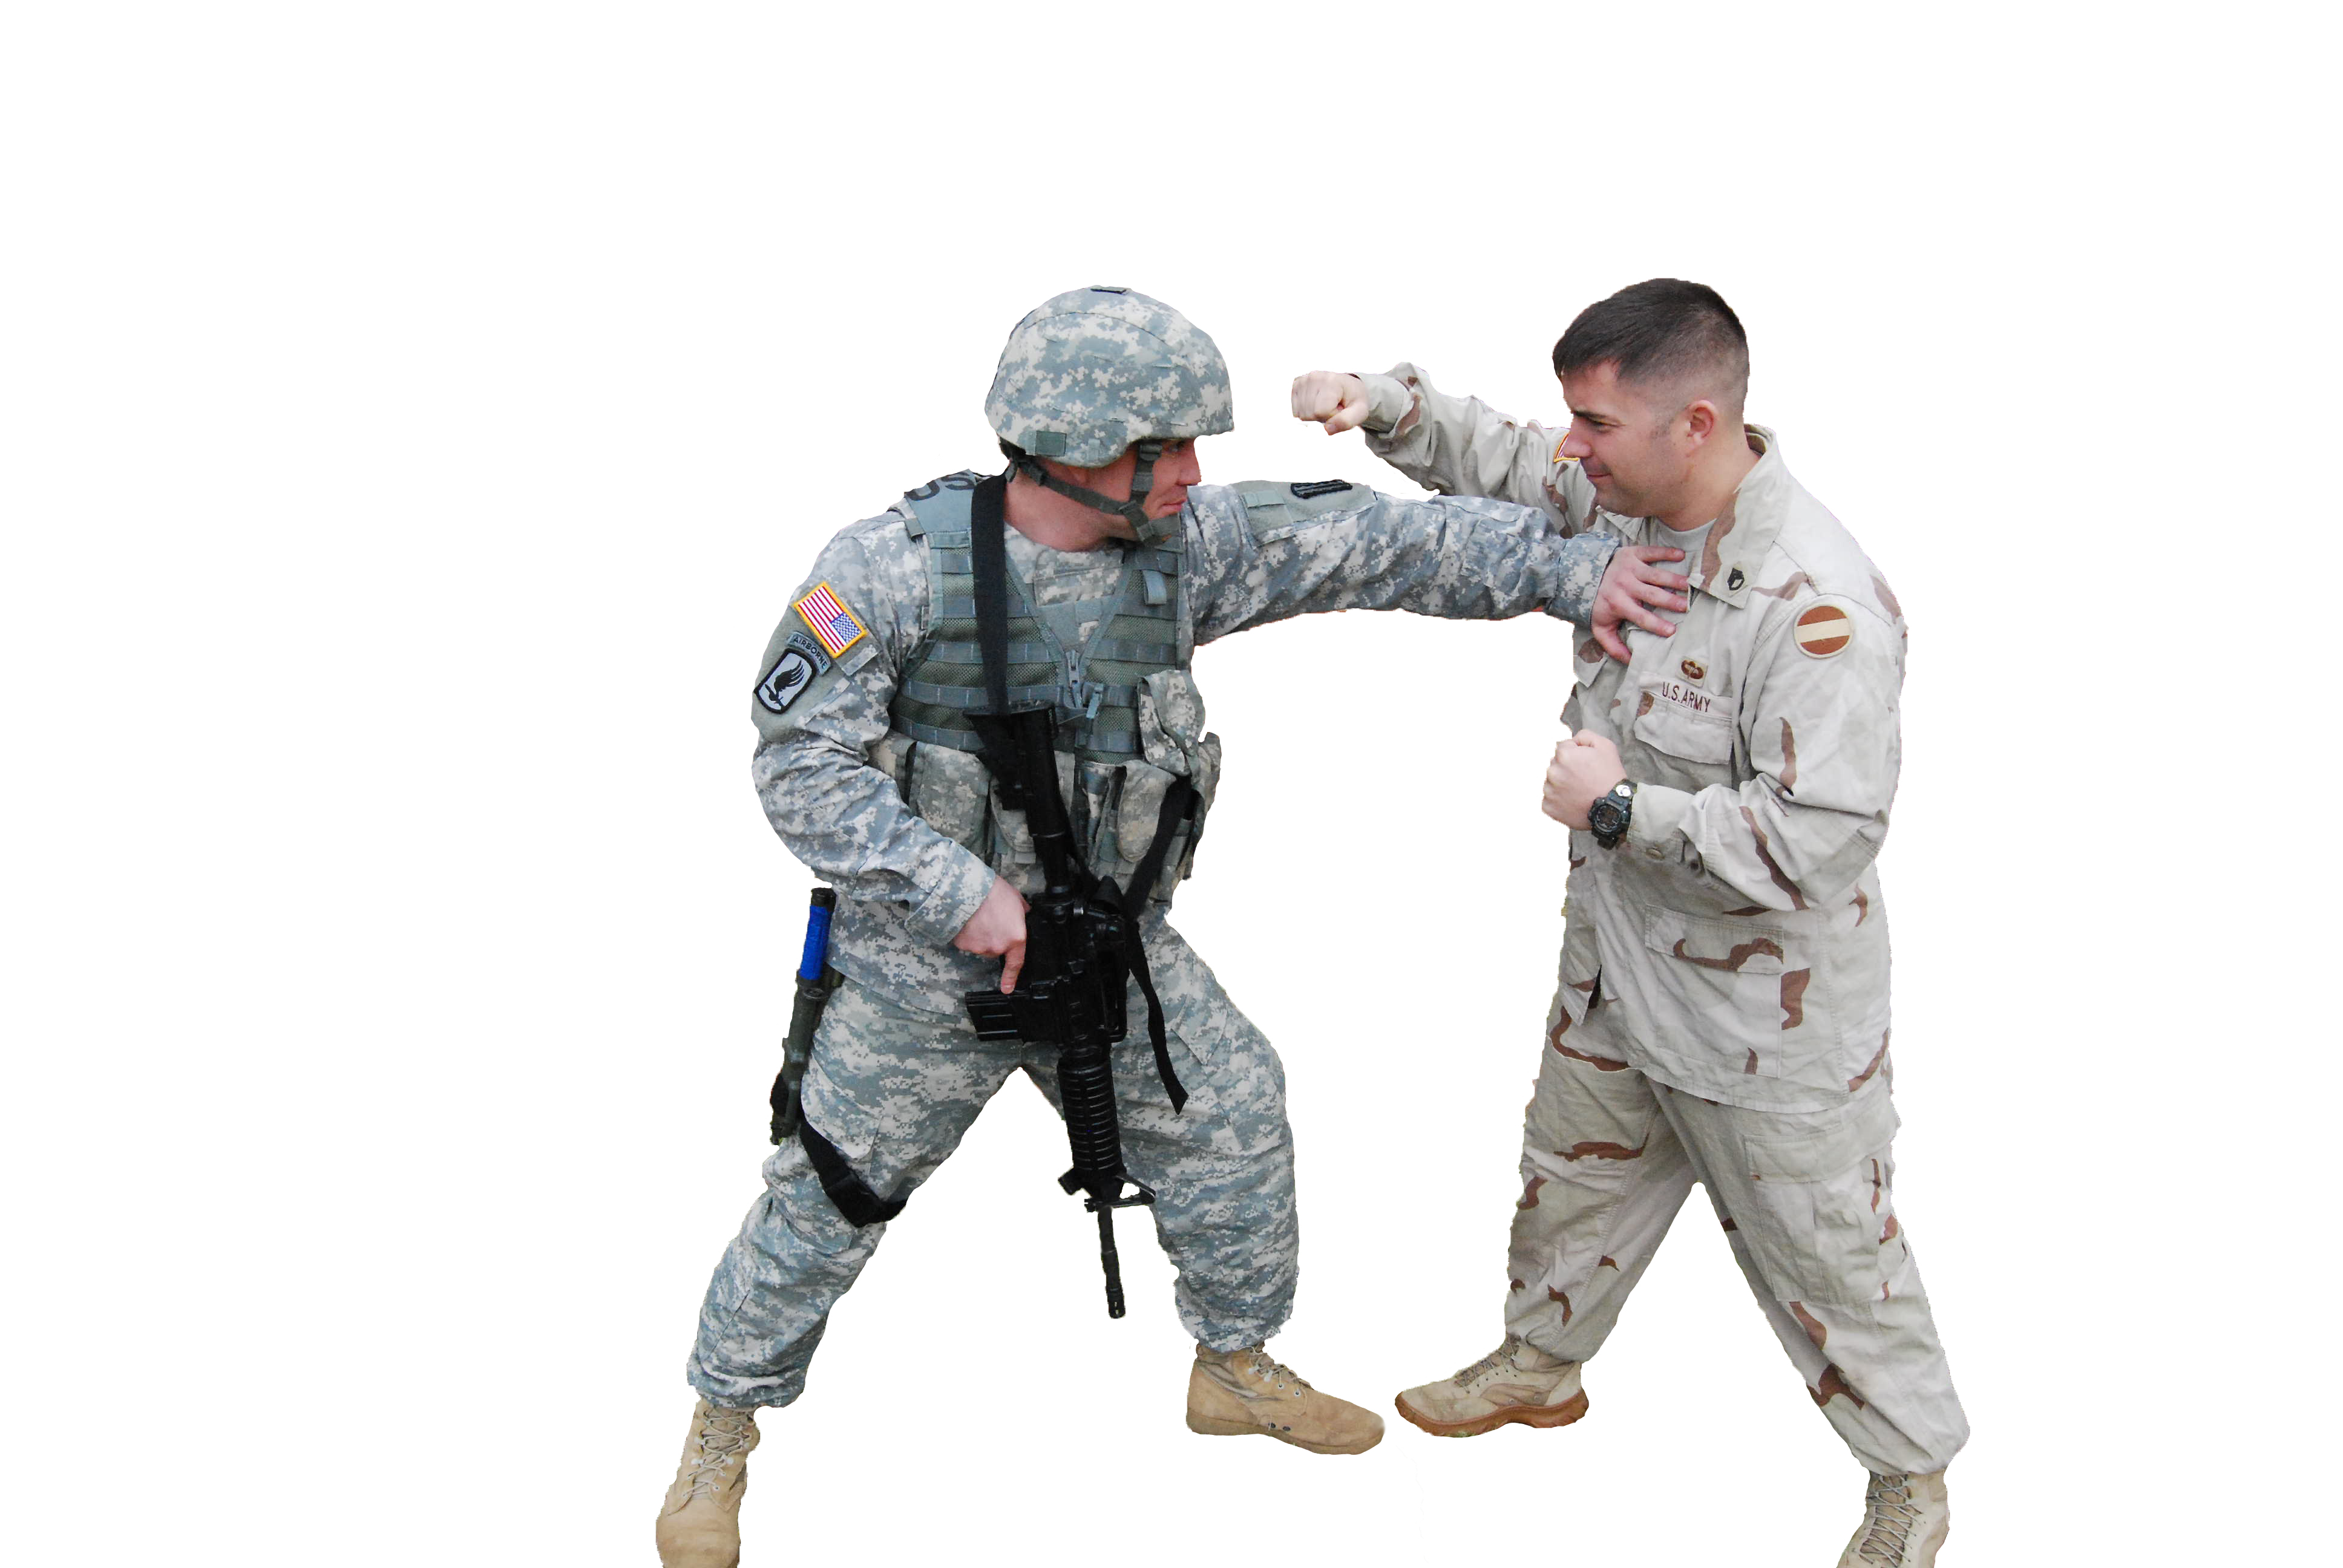 Kickin' it combatives style at Fort Benning | Article | The United ...